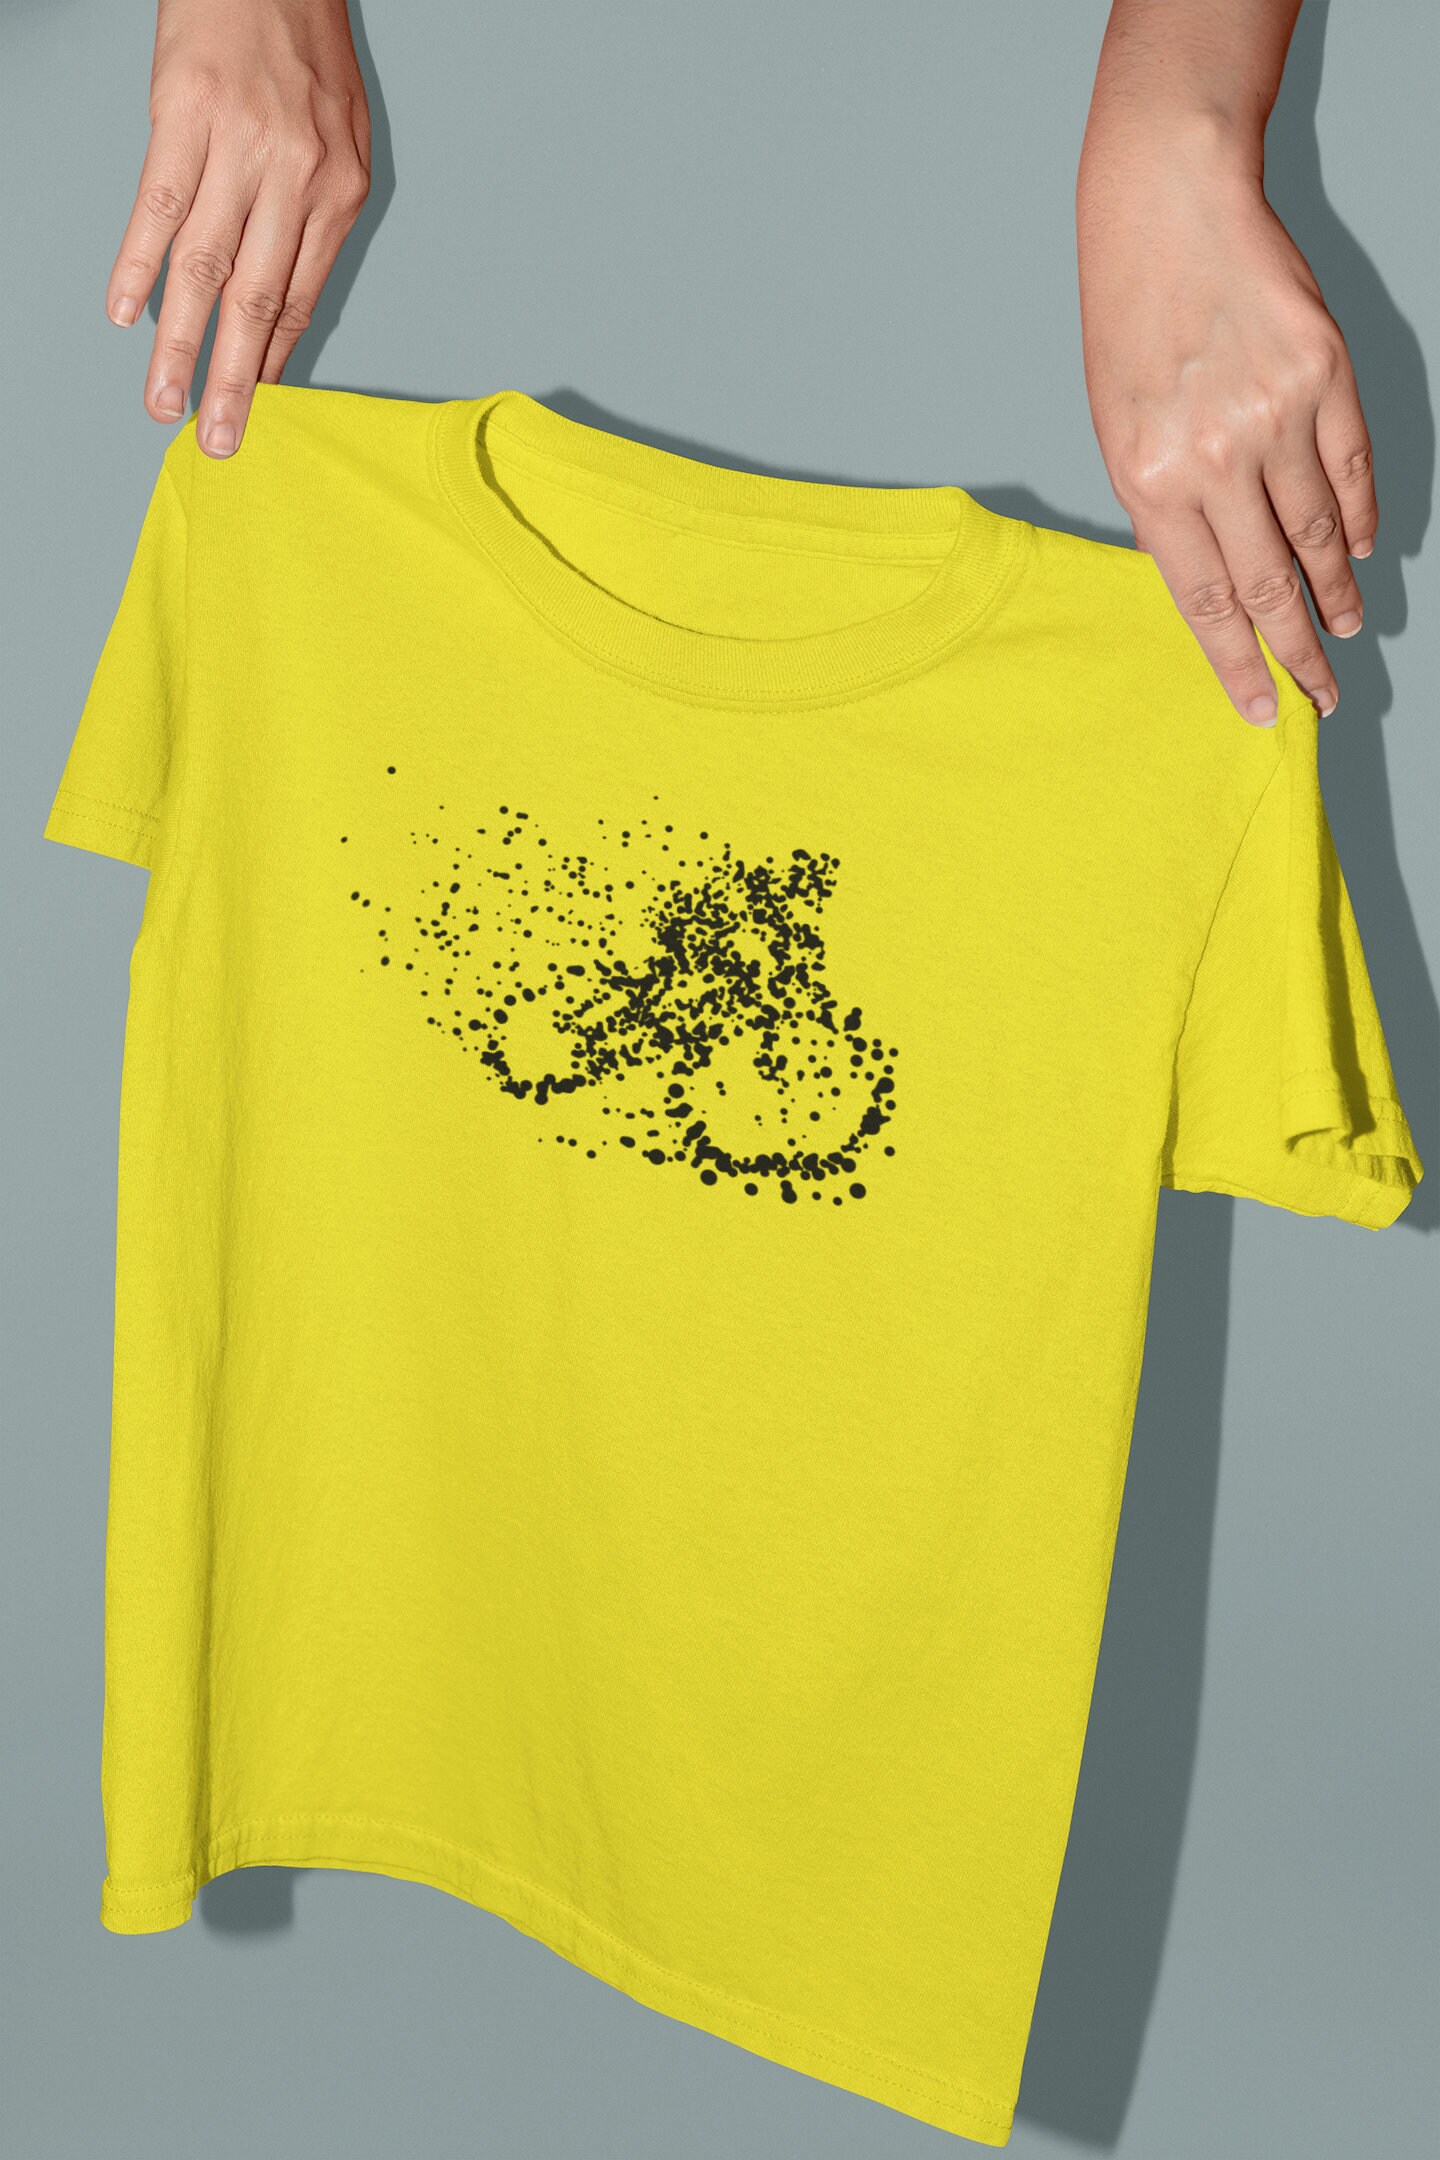 Particle Dot Cyclist T-Shirt / Mountain Biker MTB Road Bicycle - Etsy ...